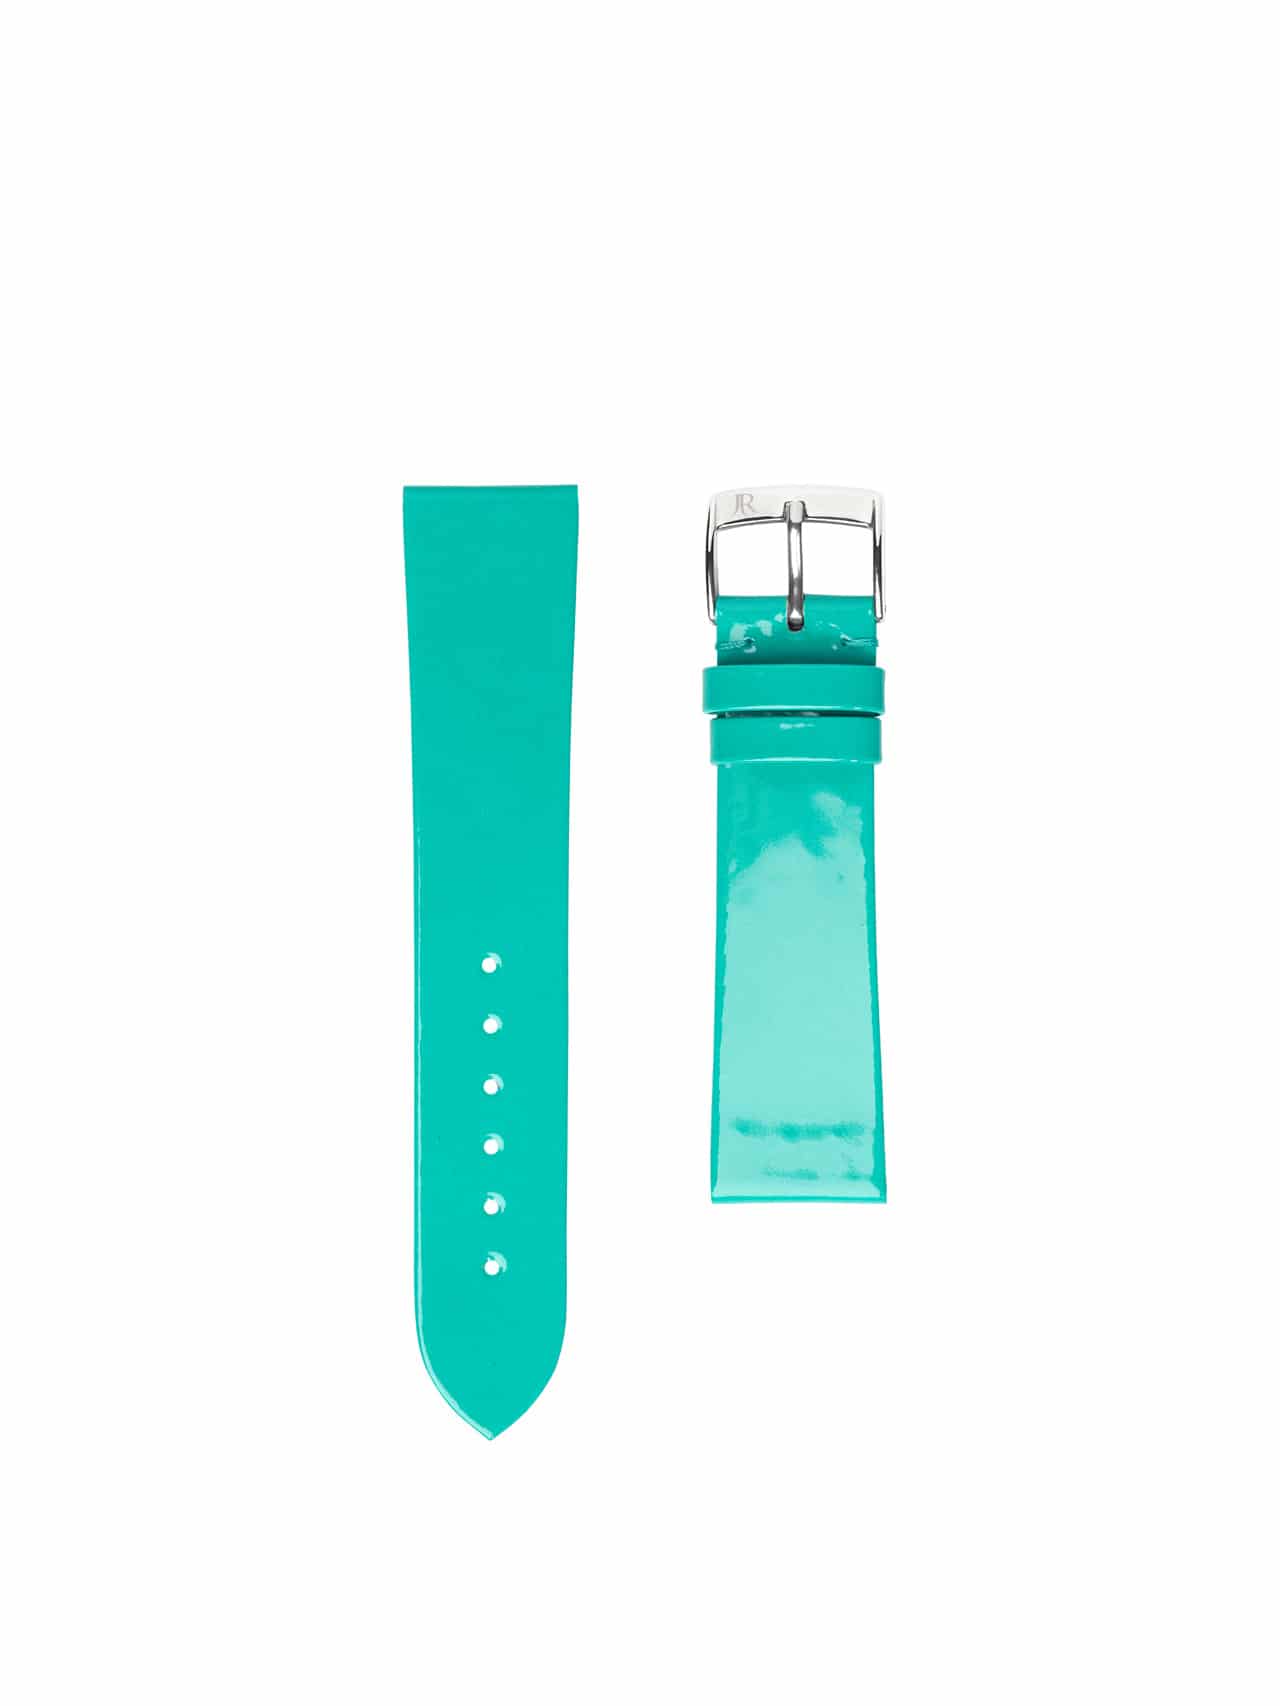 watch bands Patent leather turquoise bright women